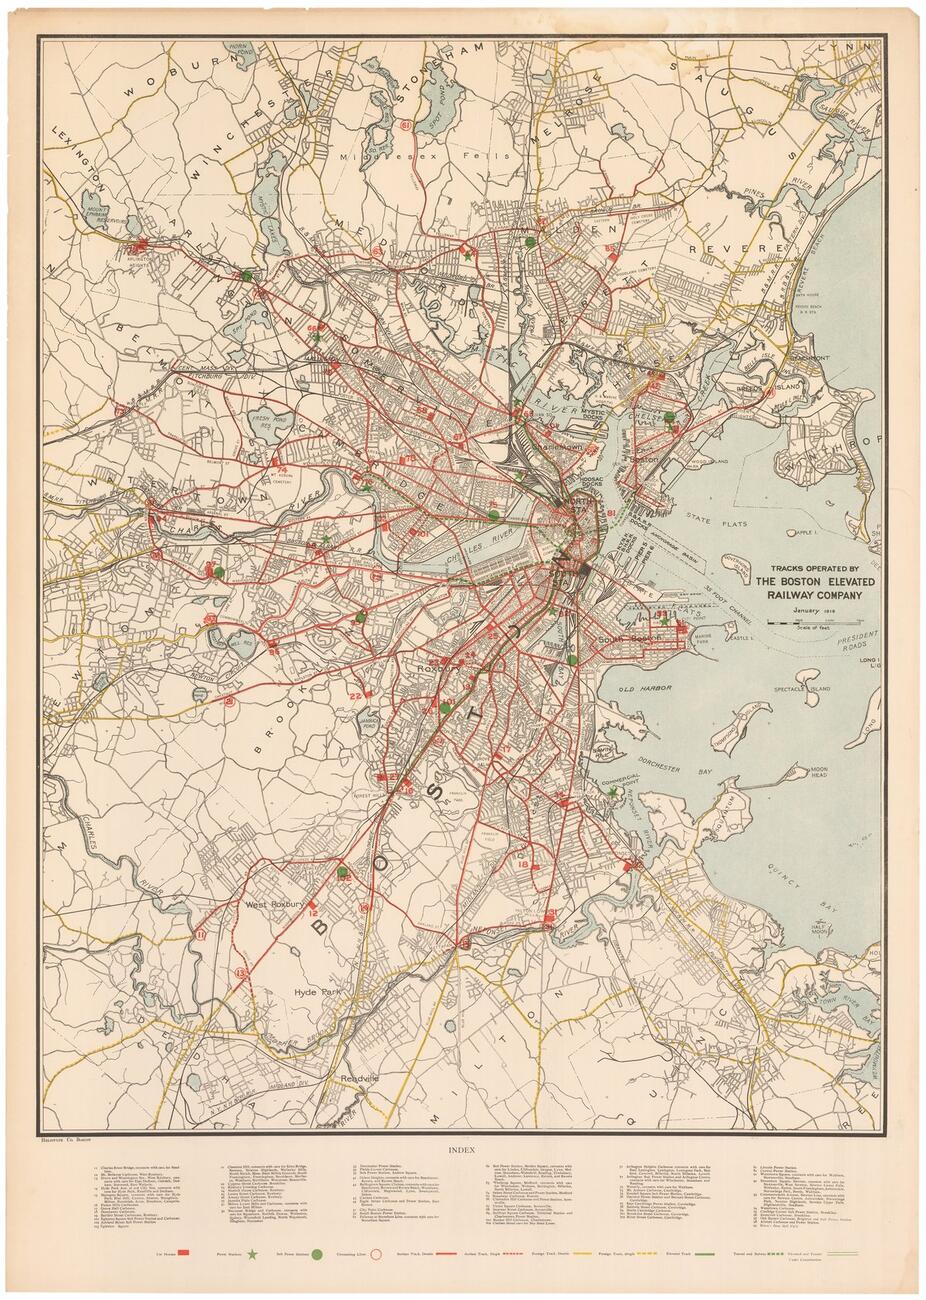 Section of a highly detailed 1916 Boston Elevated Railway Company map showing greater Boston and it' intricate network of elevated railways (in red). Waterways are shown in pale blue. 